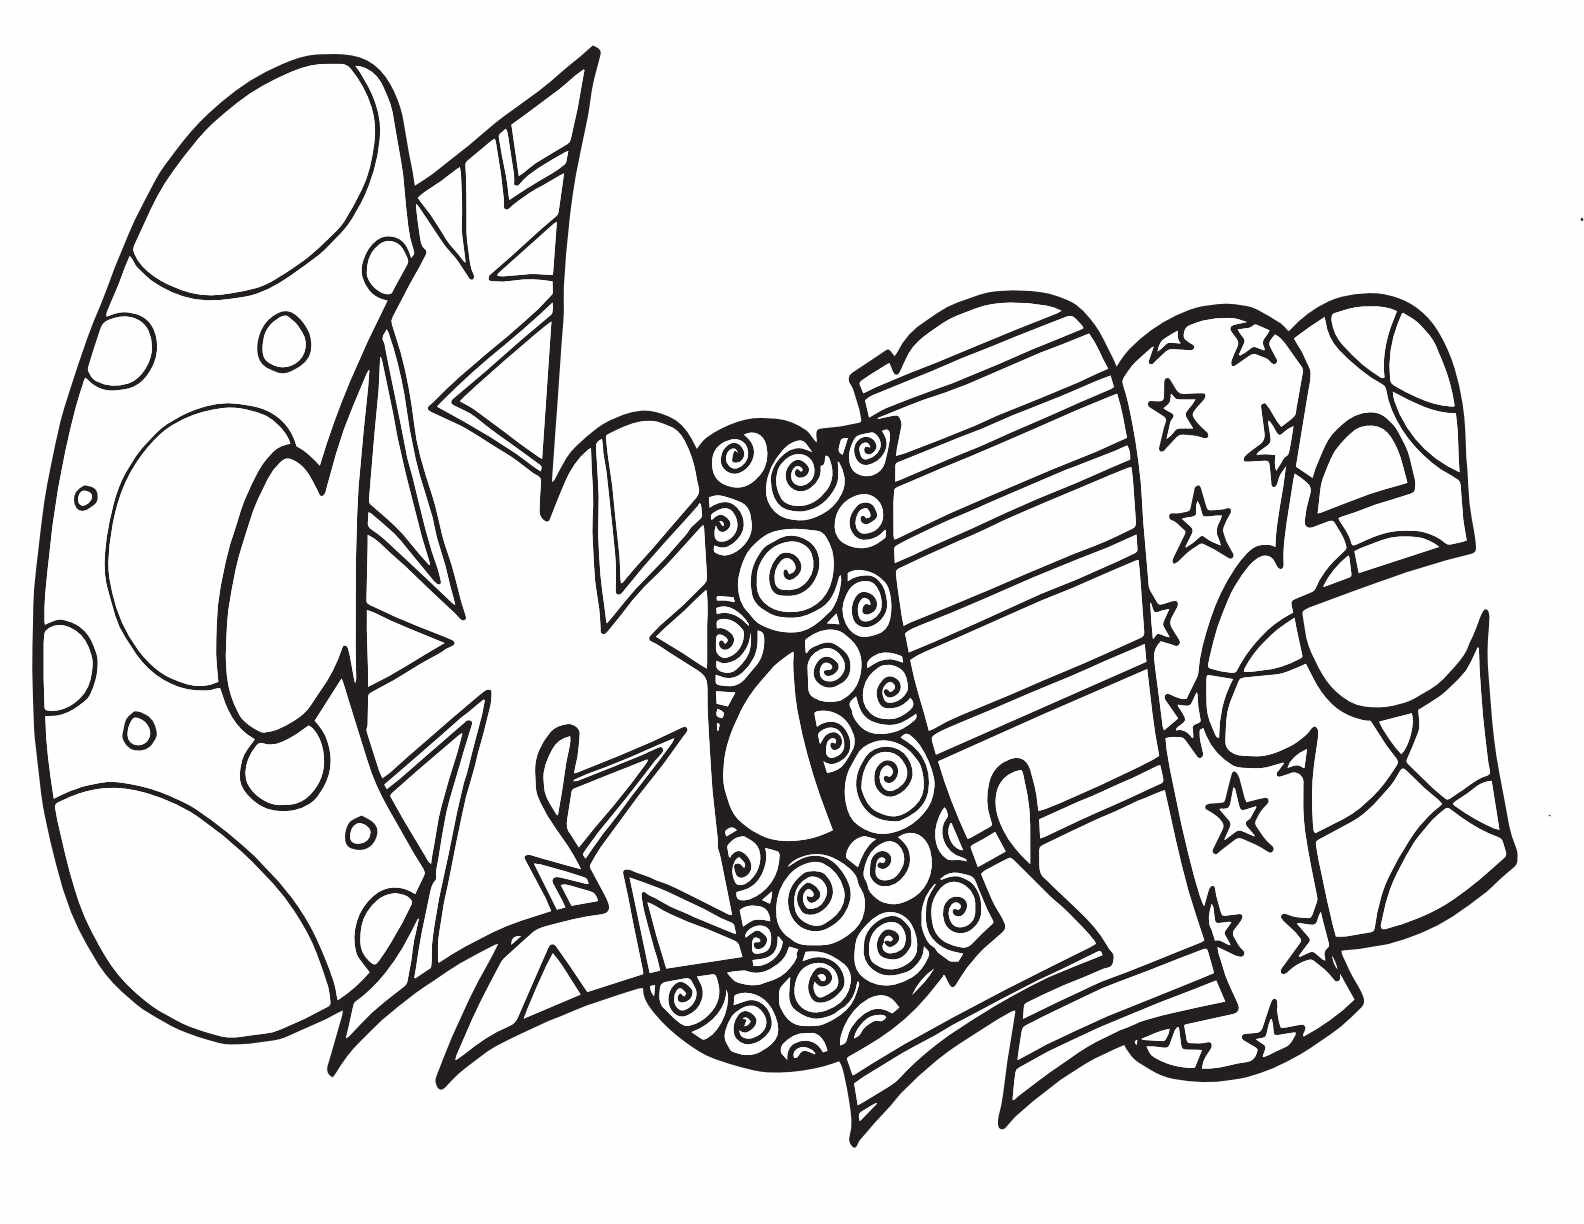 Free Printable Coloring Page - CHANCE - Search your name!  CLICK HERE TO DOWNLOAD YOUR FREE COLORING PAGE